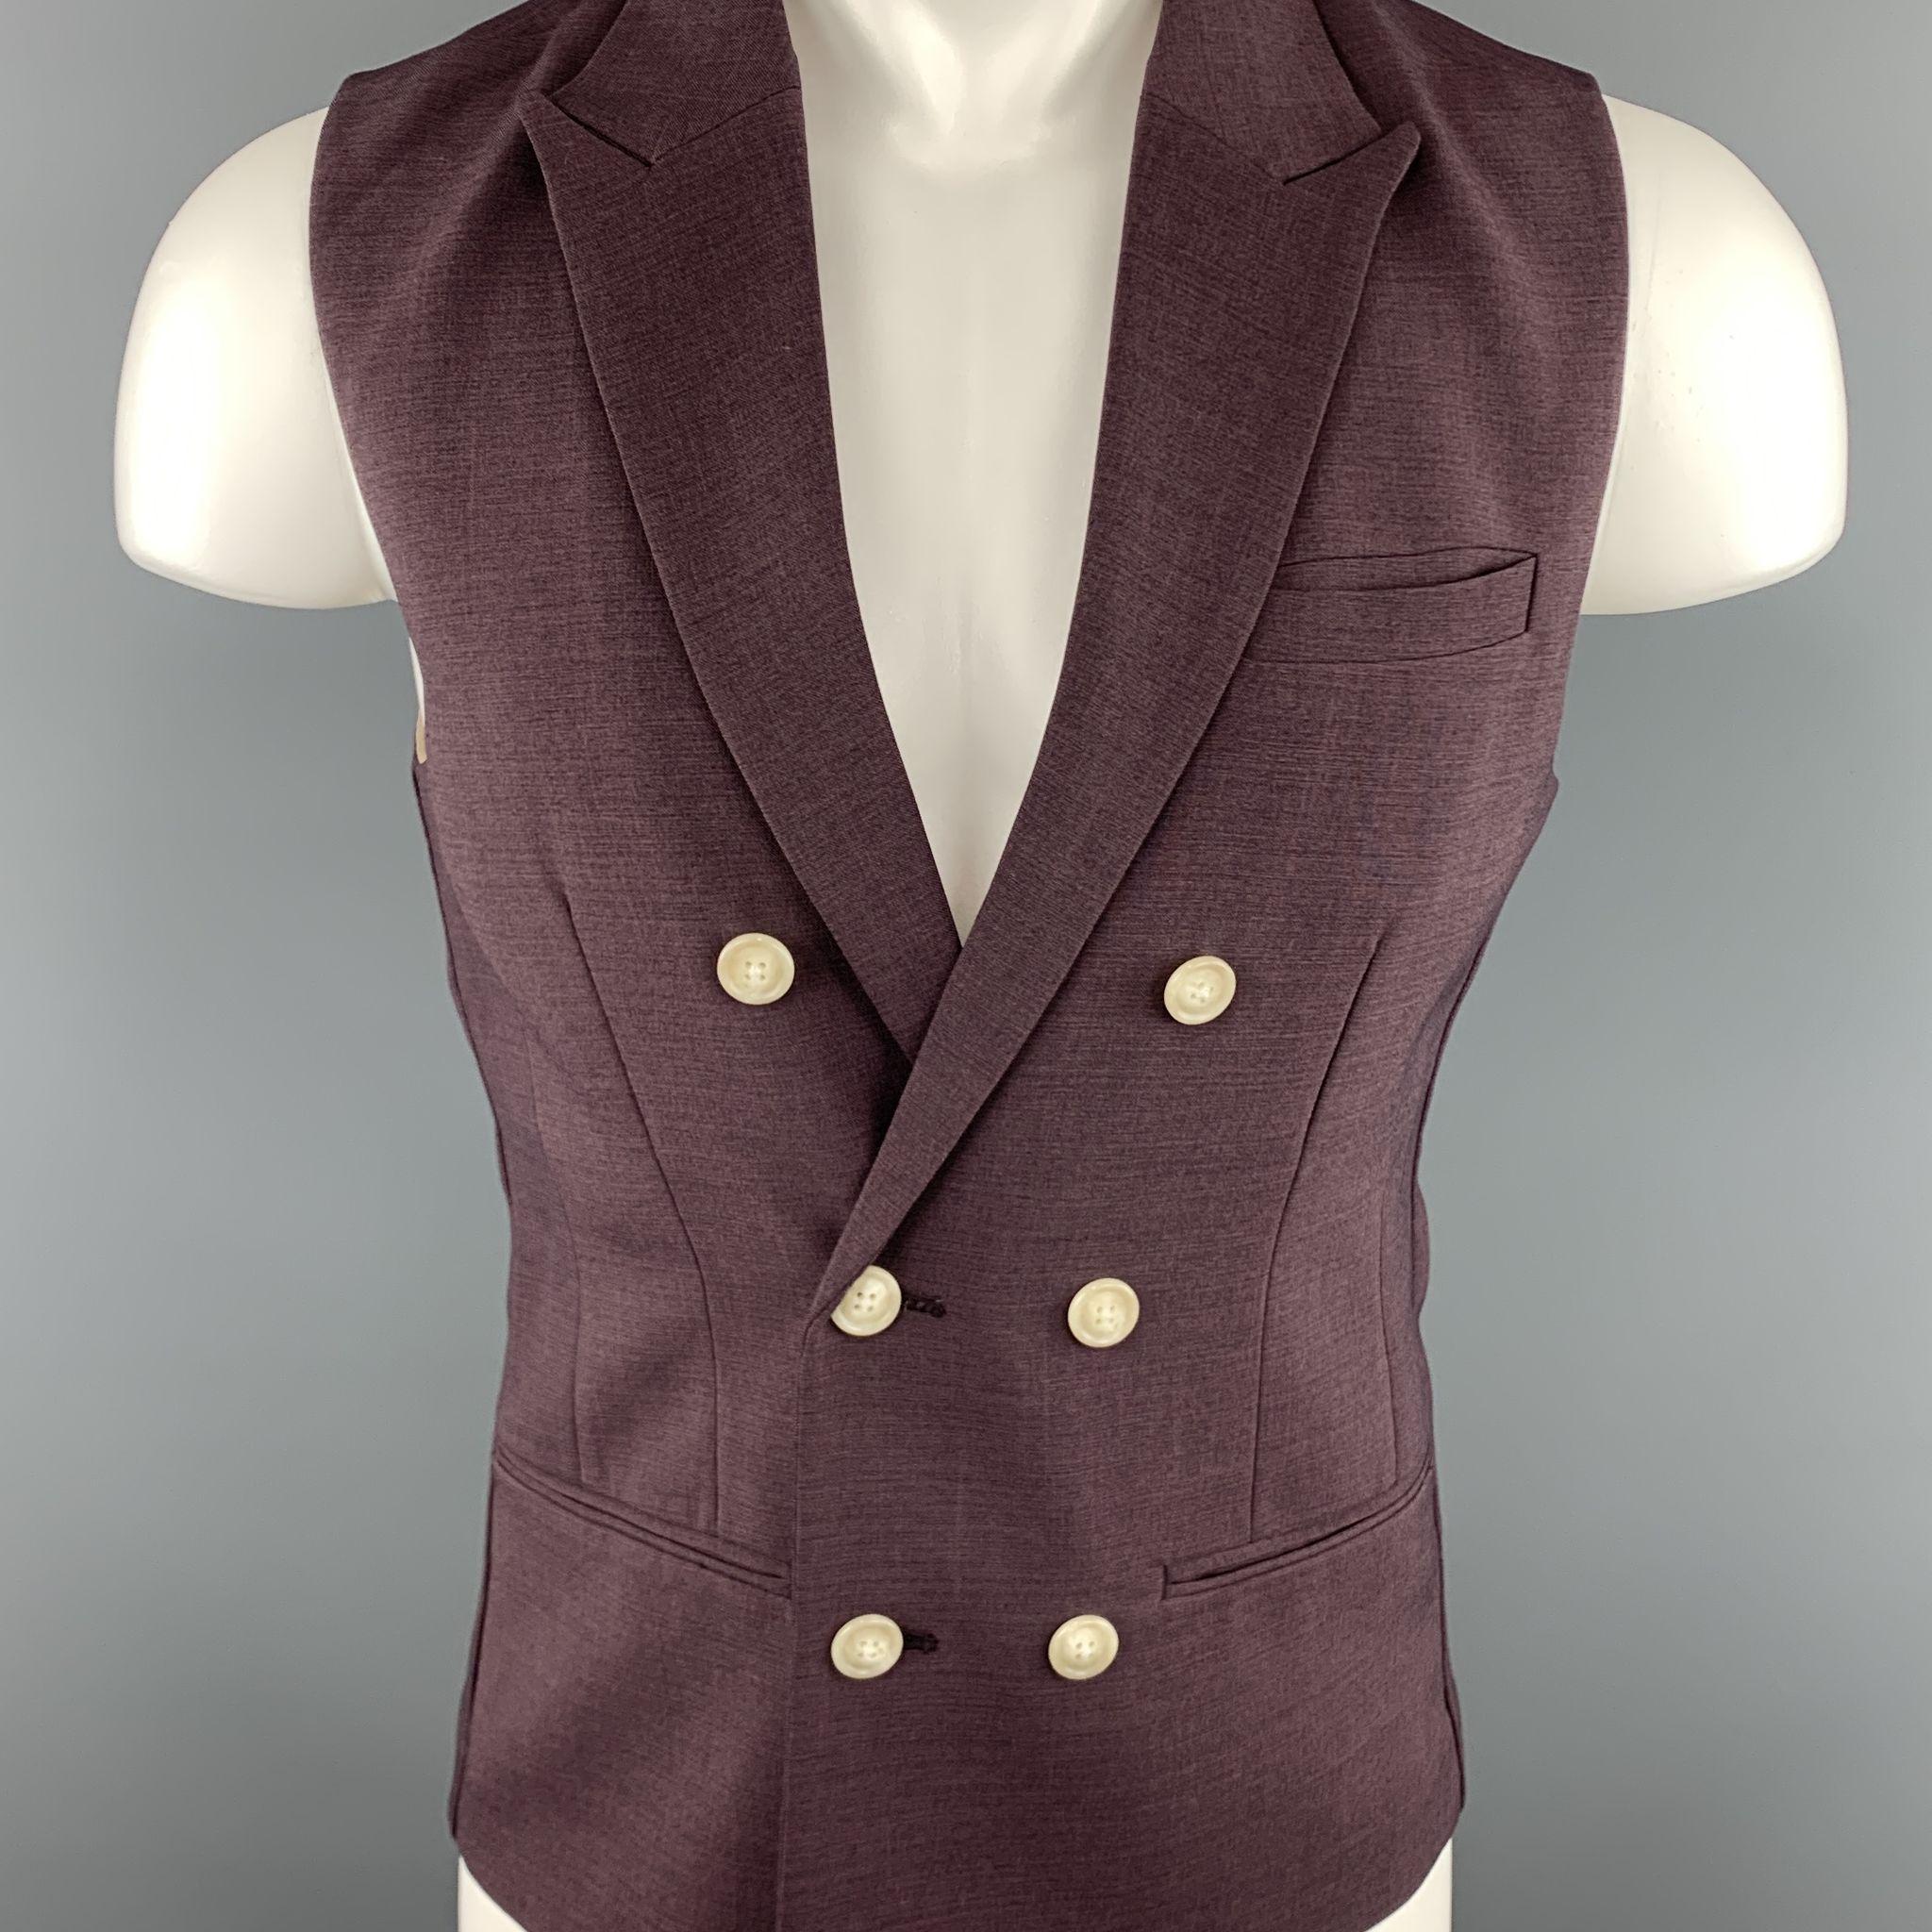 Initial vest comes in a eggplant polyester blend featuring a double breasted style, peak lapel, slit pockets, and a single vent.

Excellent Pre-Owned Condition.
Marked: No size

Measurements:

Shoulder: 14 in. 
Chest: 34 in. 
Length: 24 in. 

SKU: